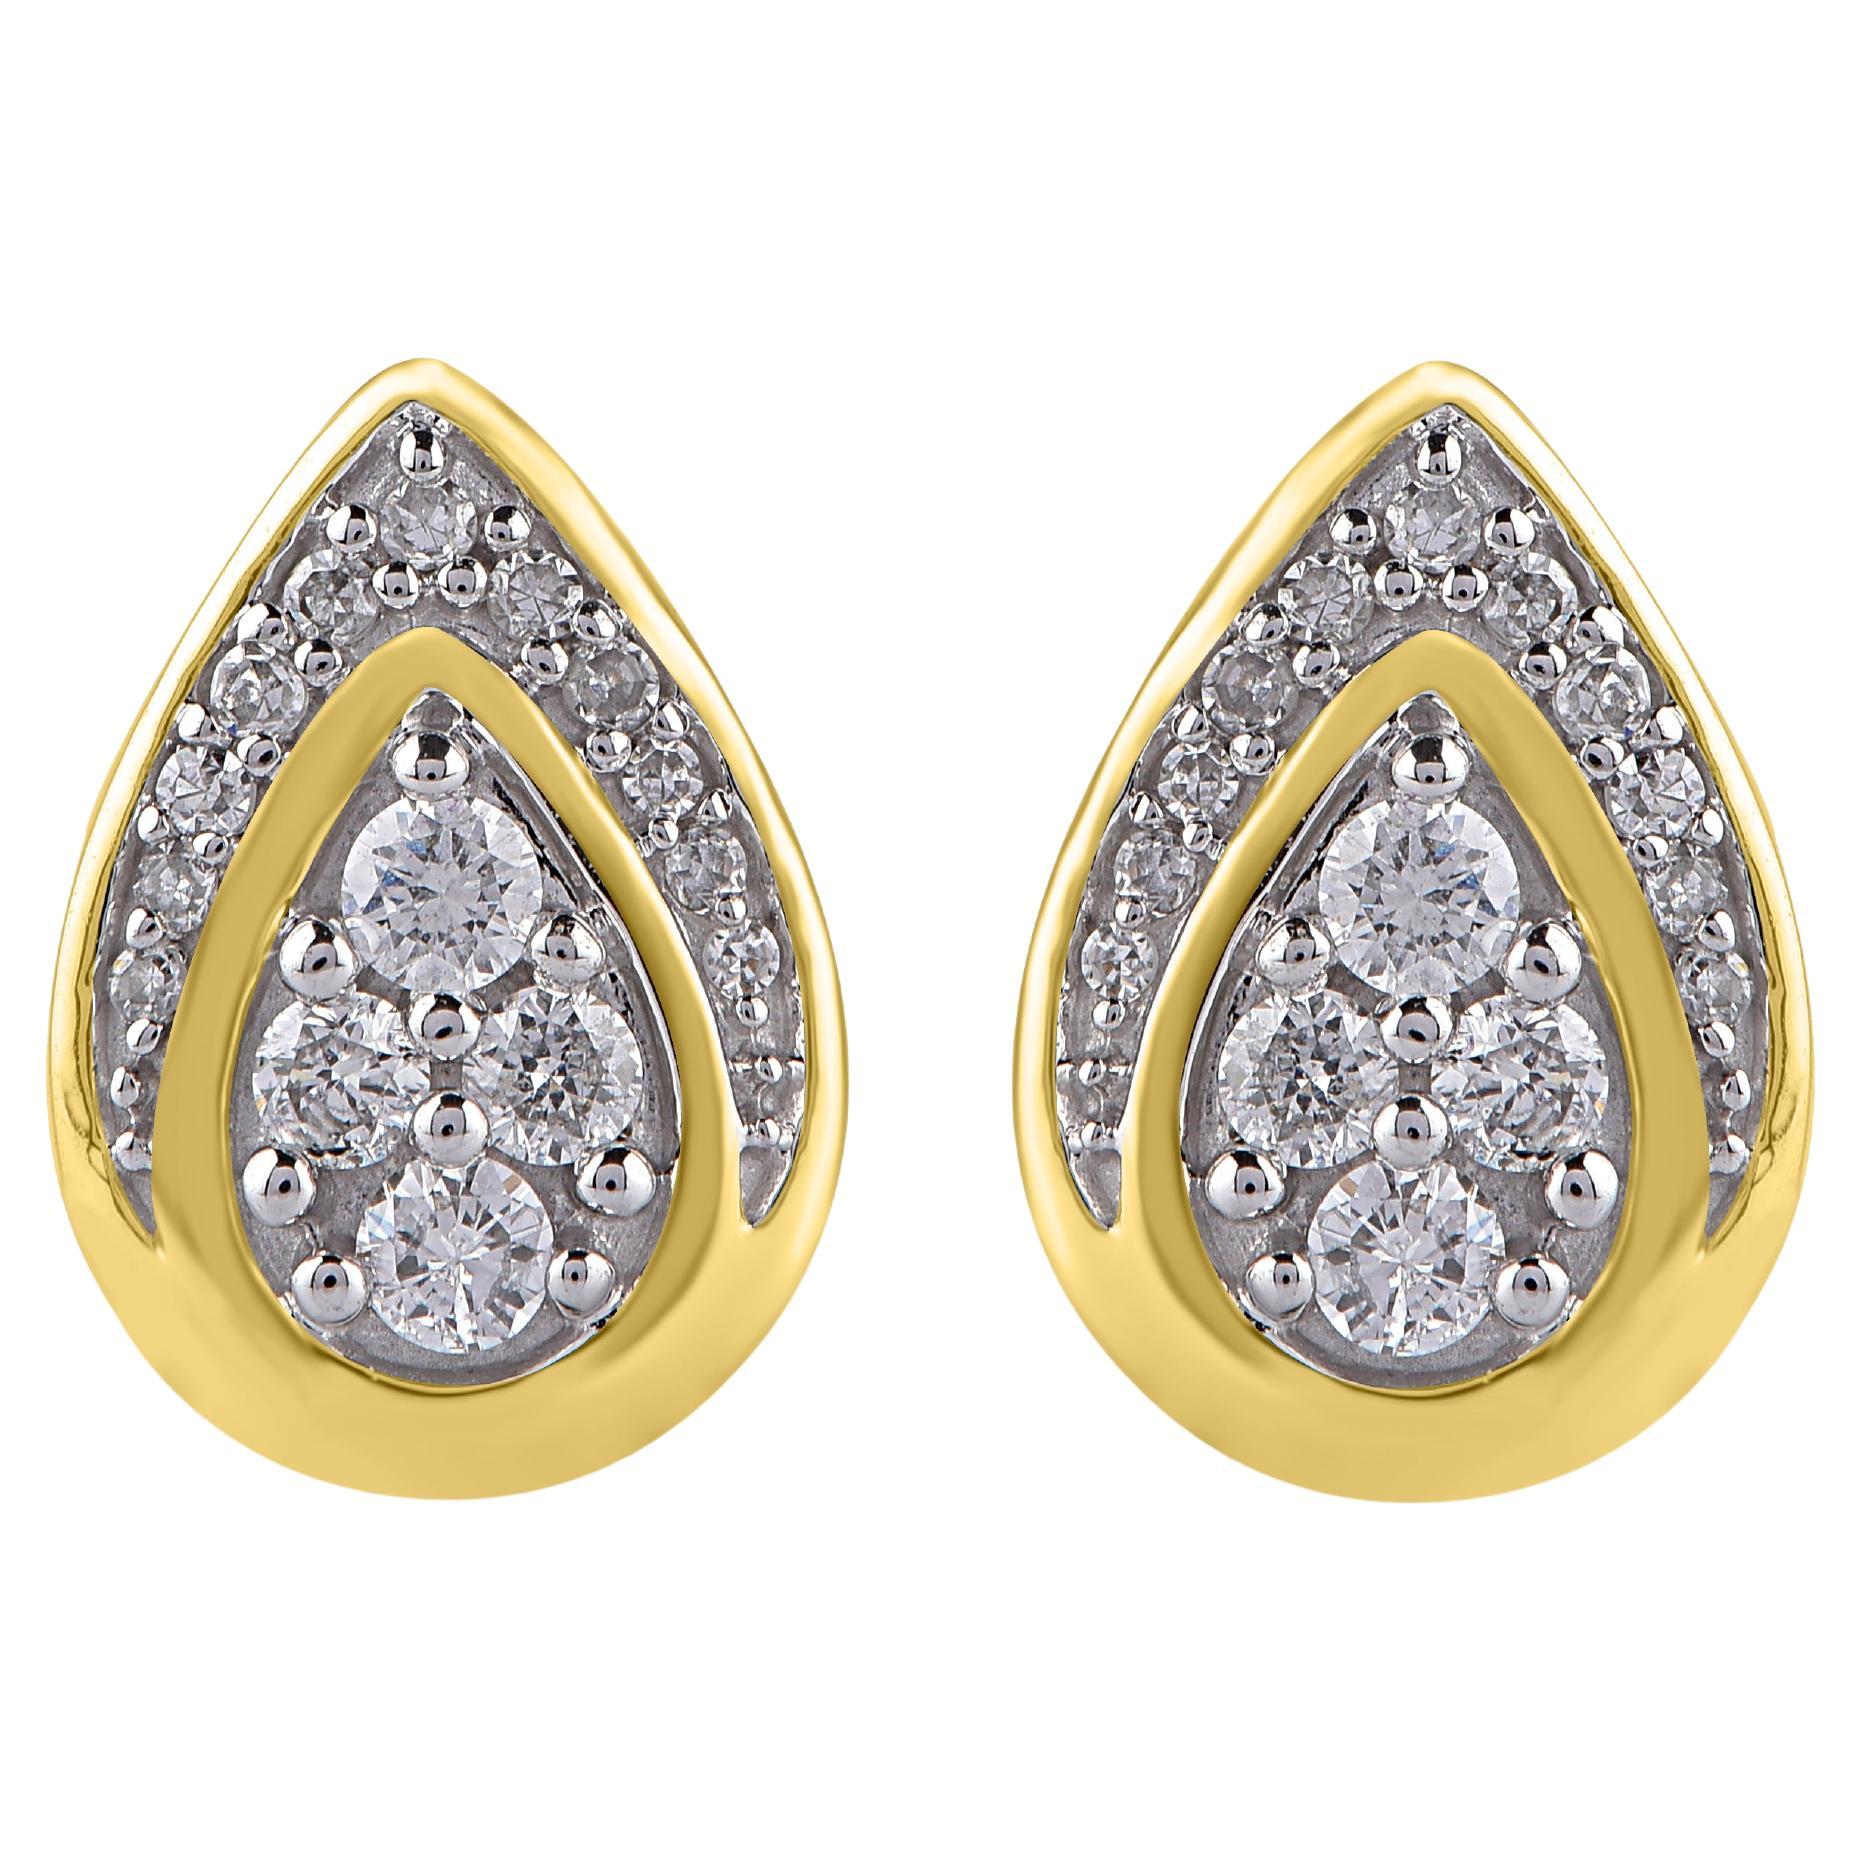 TJD 0.25 Carat Natural Round Diamond 14KT Yellow Gold Teardrop Stud Earrings For Sale